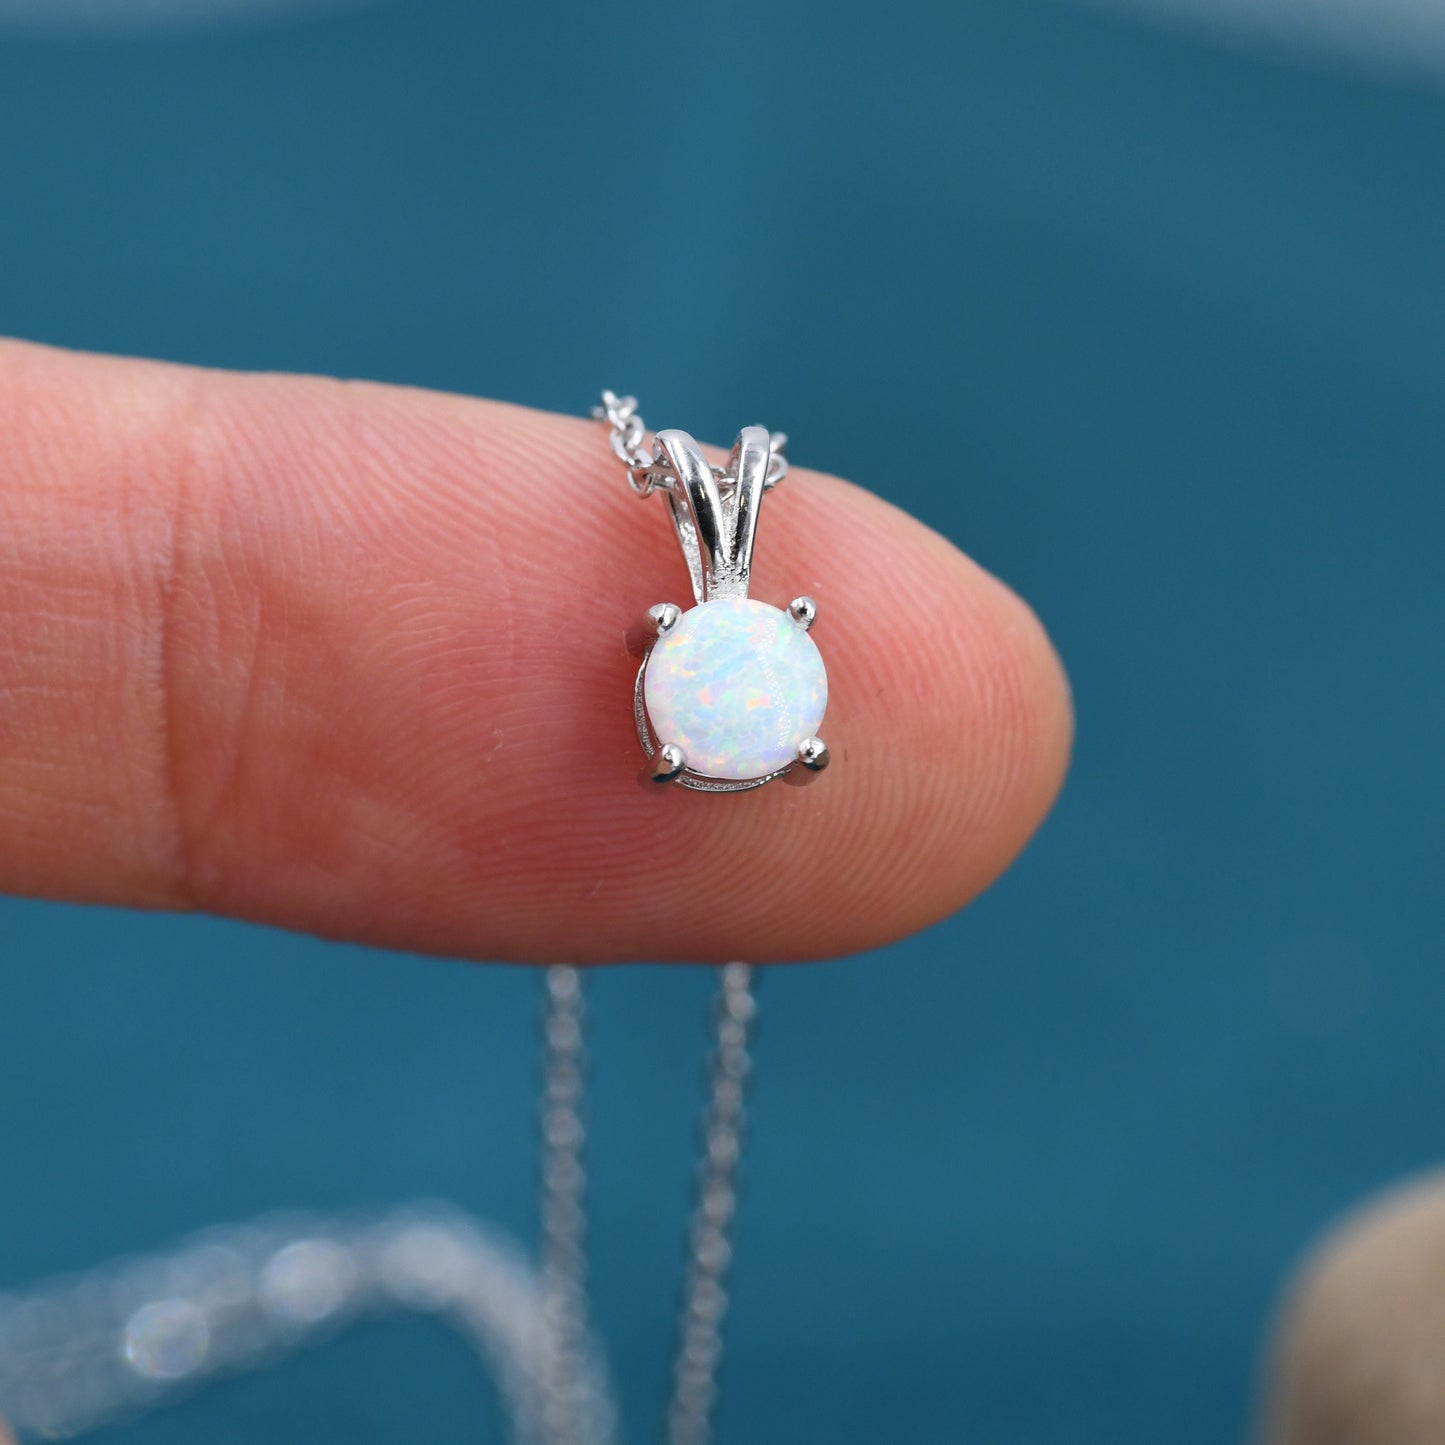 Tiny White Opal Pendant Necklace  in Sterling Silver, 5mm Lab Opal Necklace,  Single Opal Necklace, Fire Opal Necklace